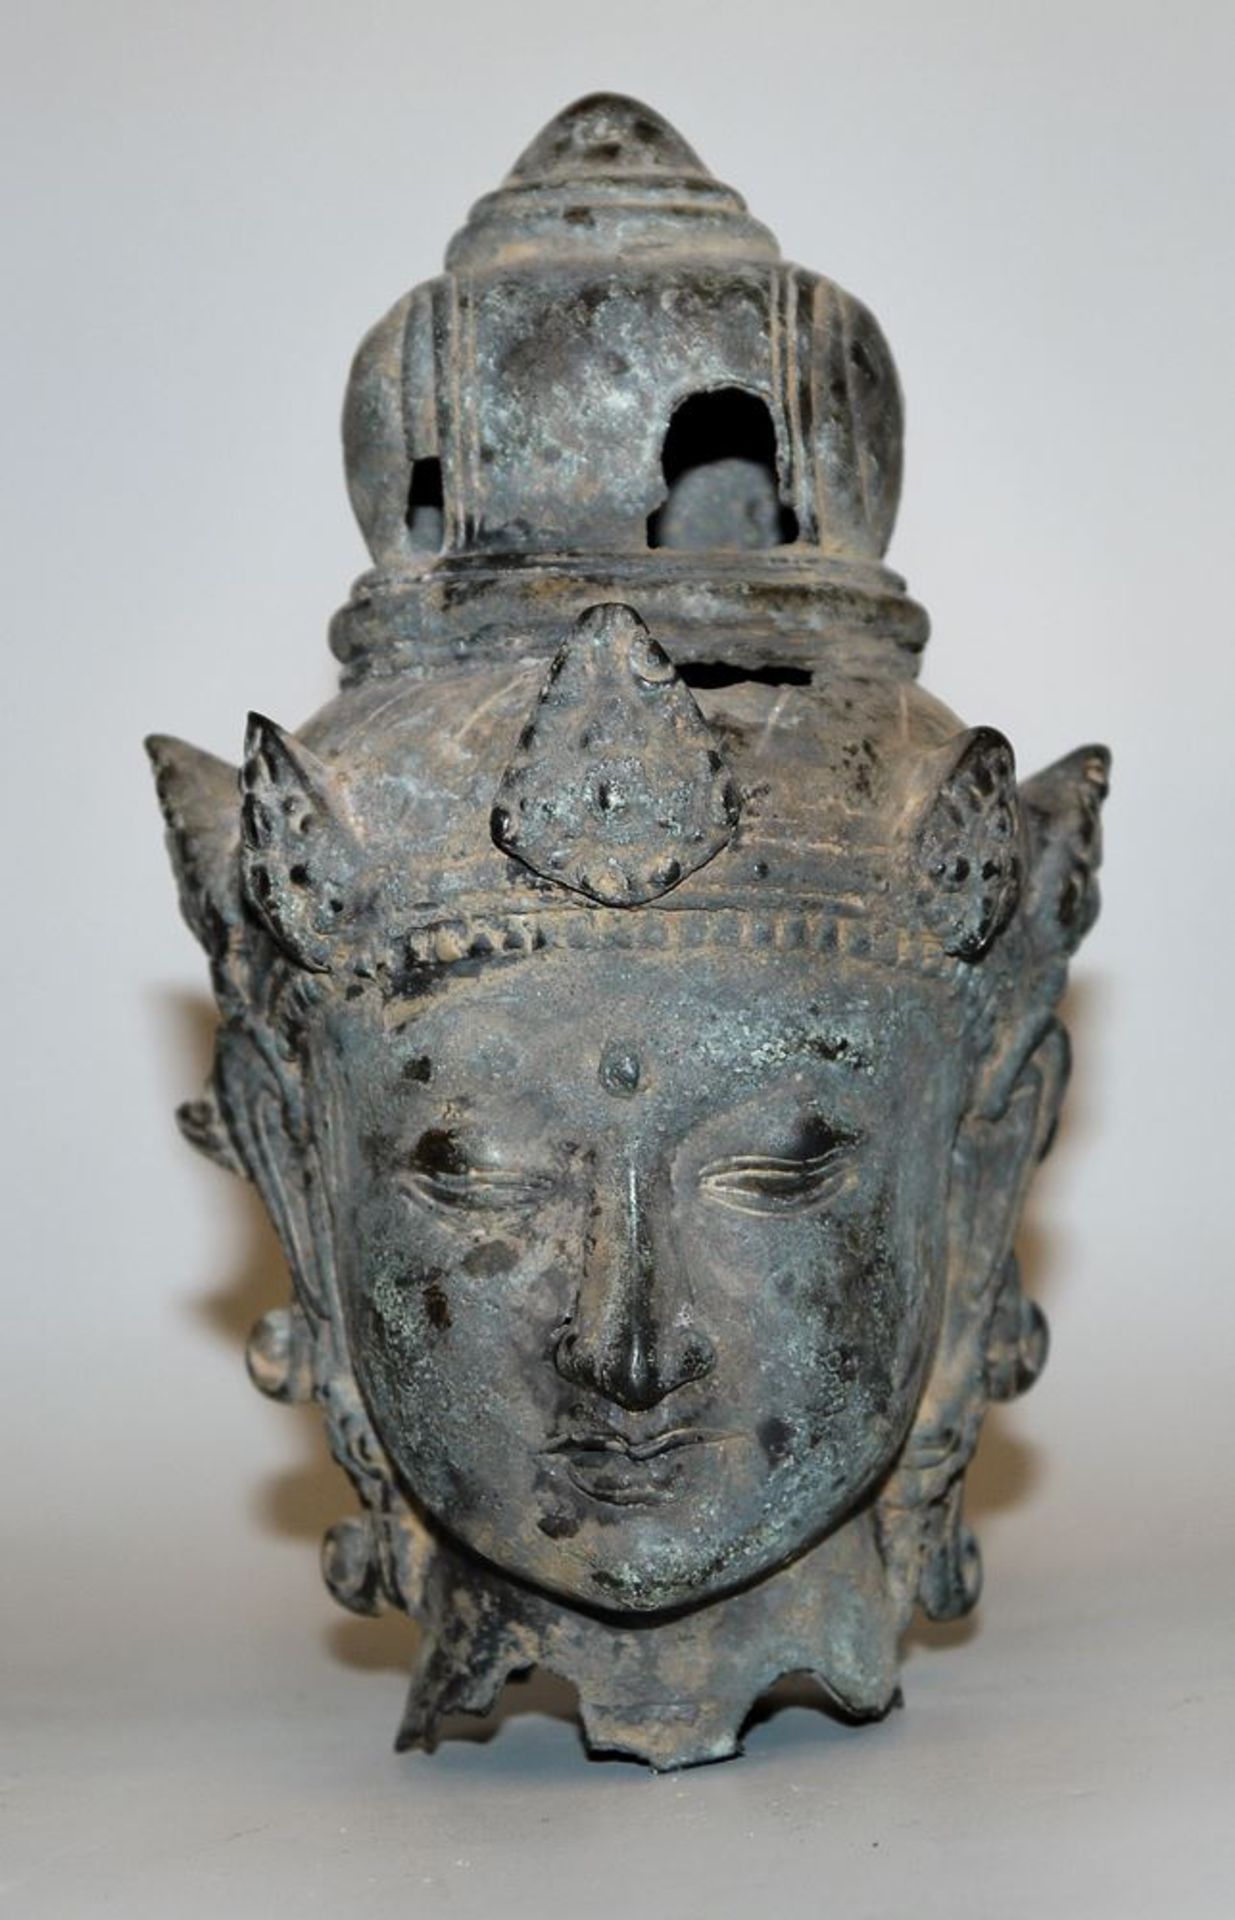 Head of a deity or a bodhisattva in Majapahit style, East Java, Indonesia